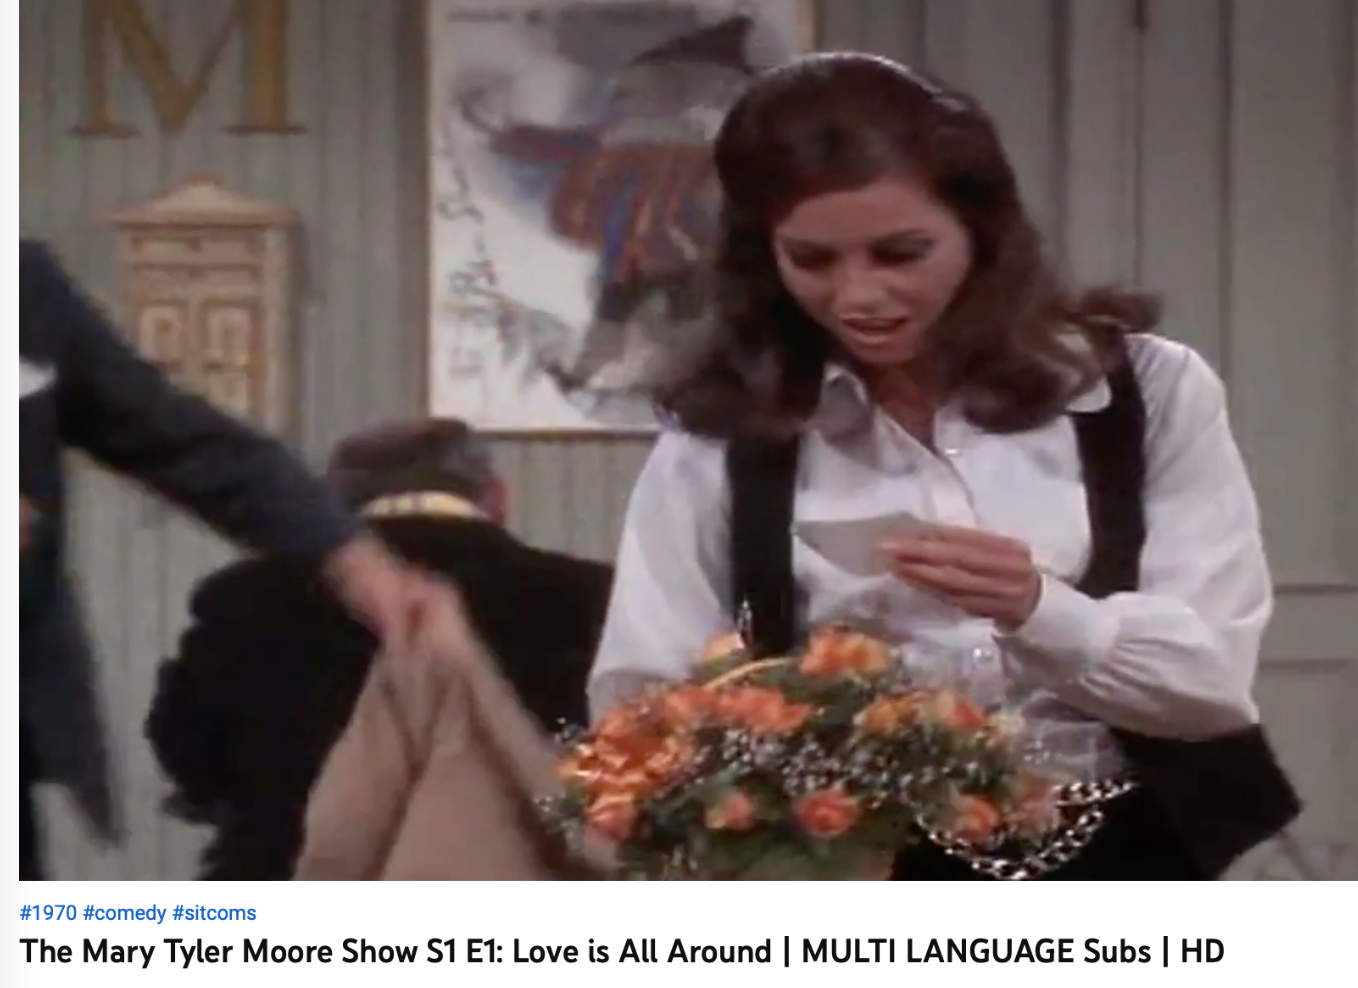 Mary Richards getting flowers from her ex.